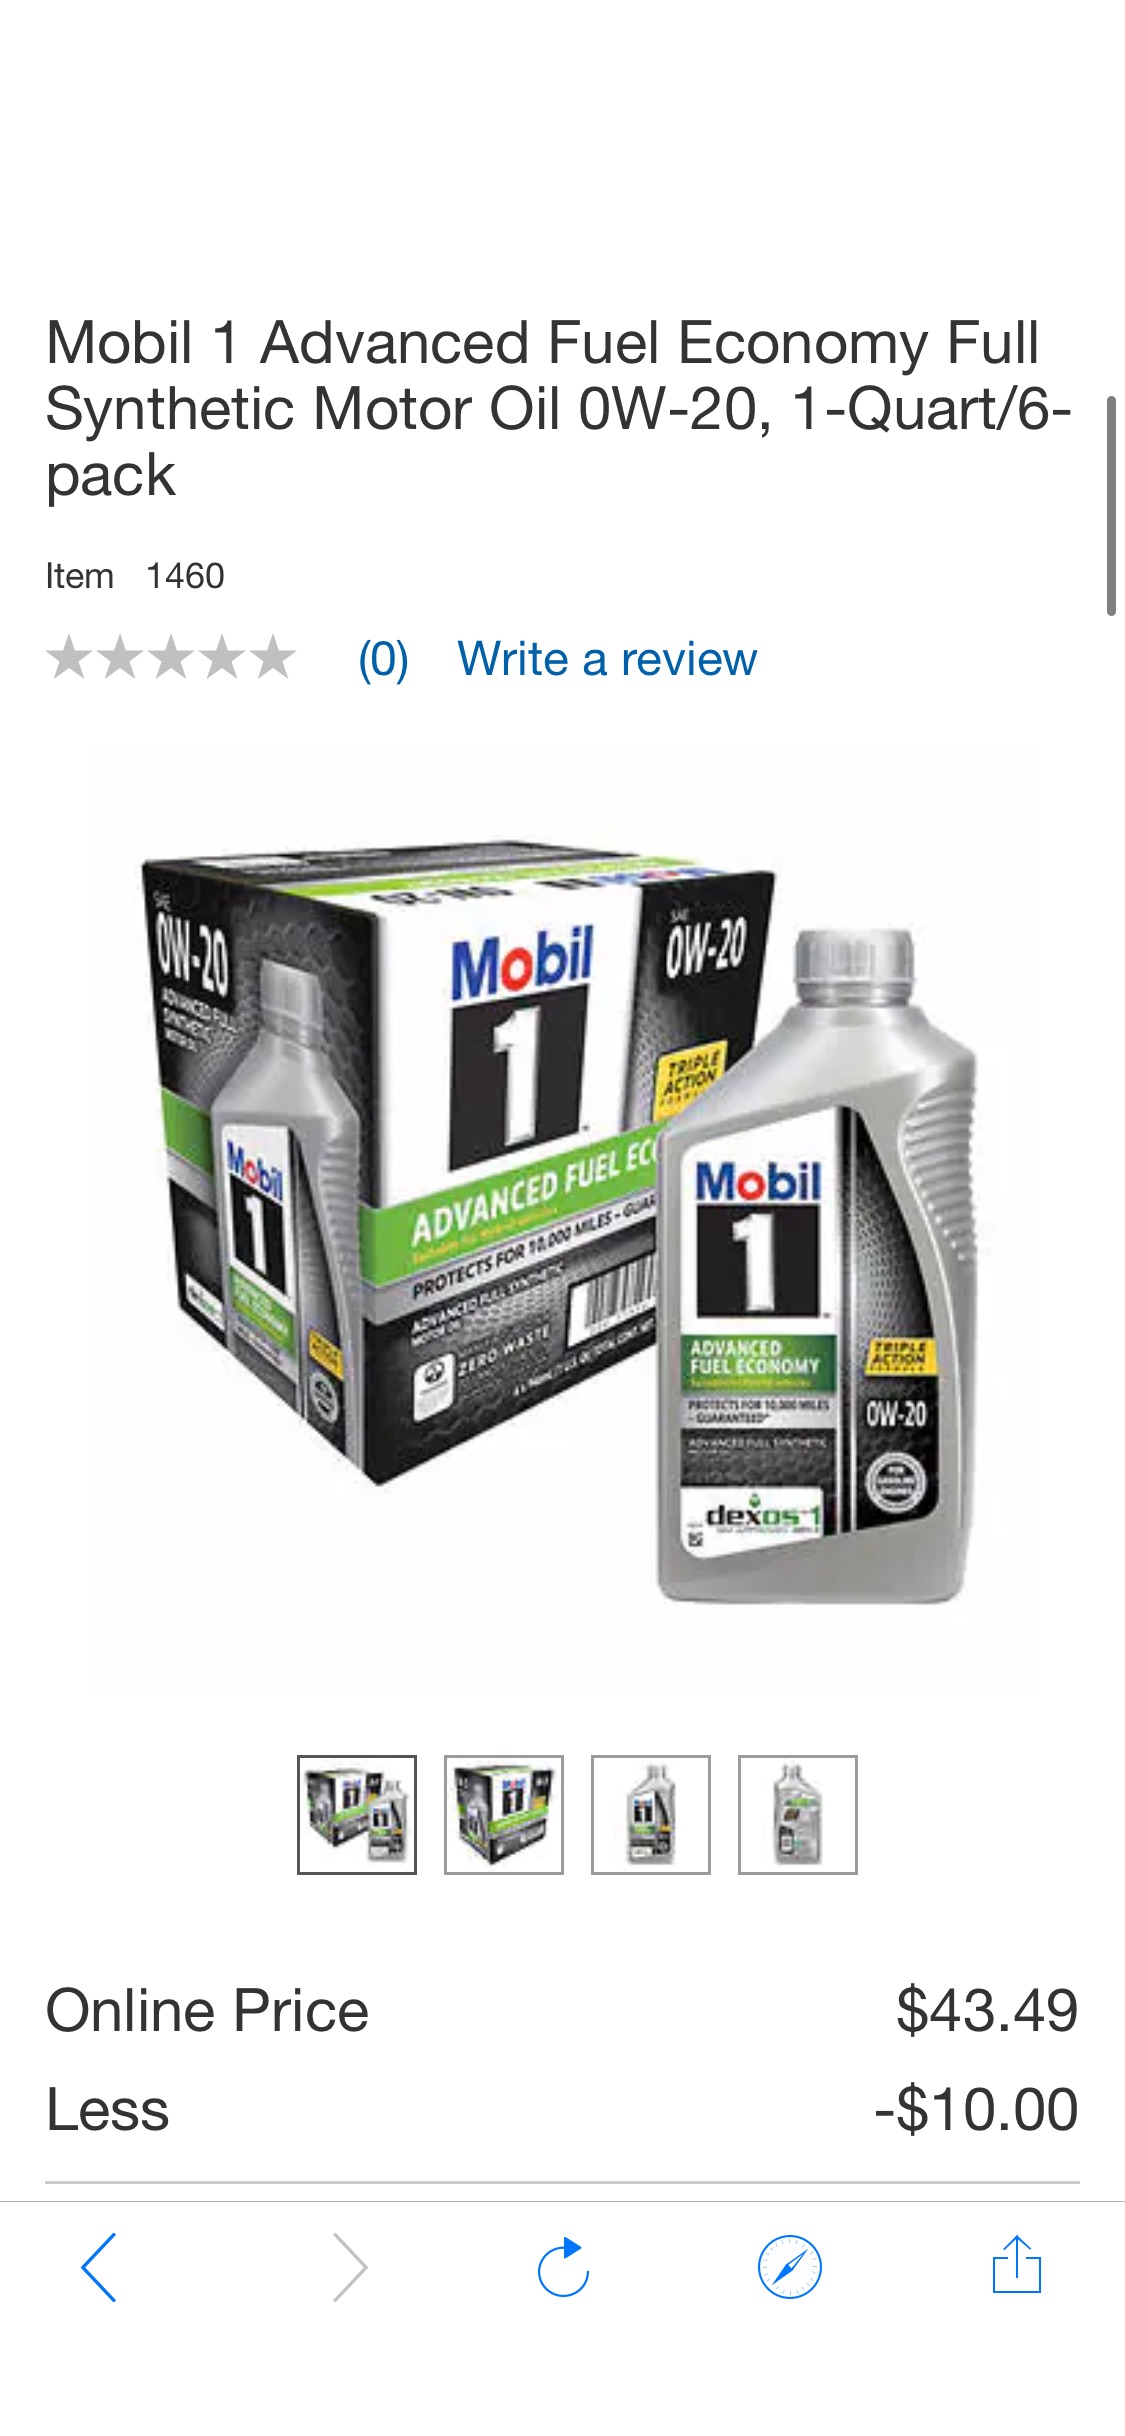 Mobil 1 Advanced Fuel Economy Full Synthetic Motor Oil 0W-20, 1-Quart/6-pack | Costco